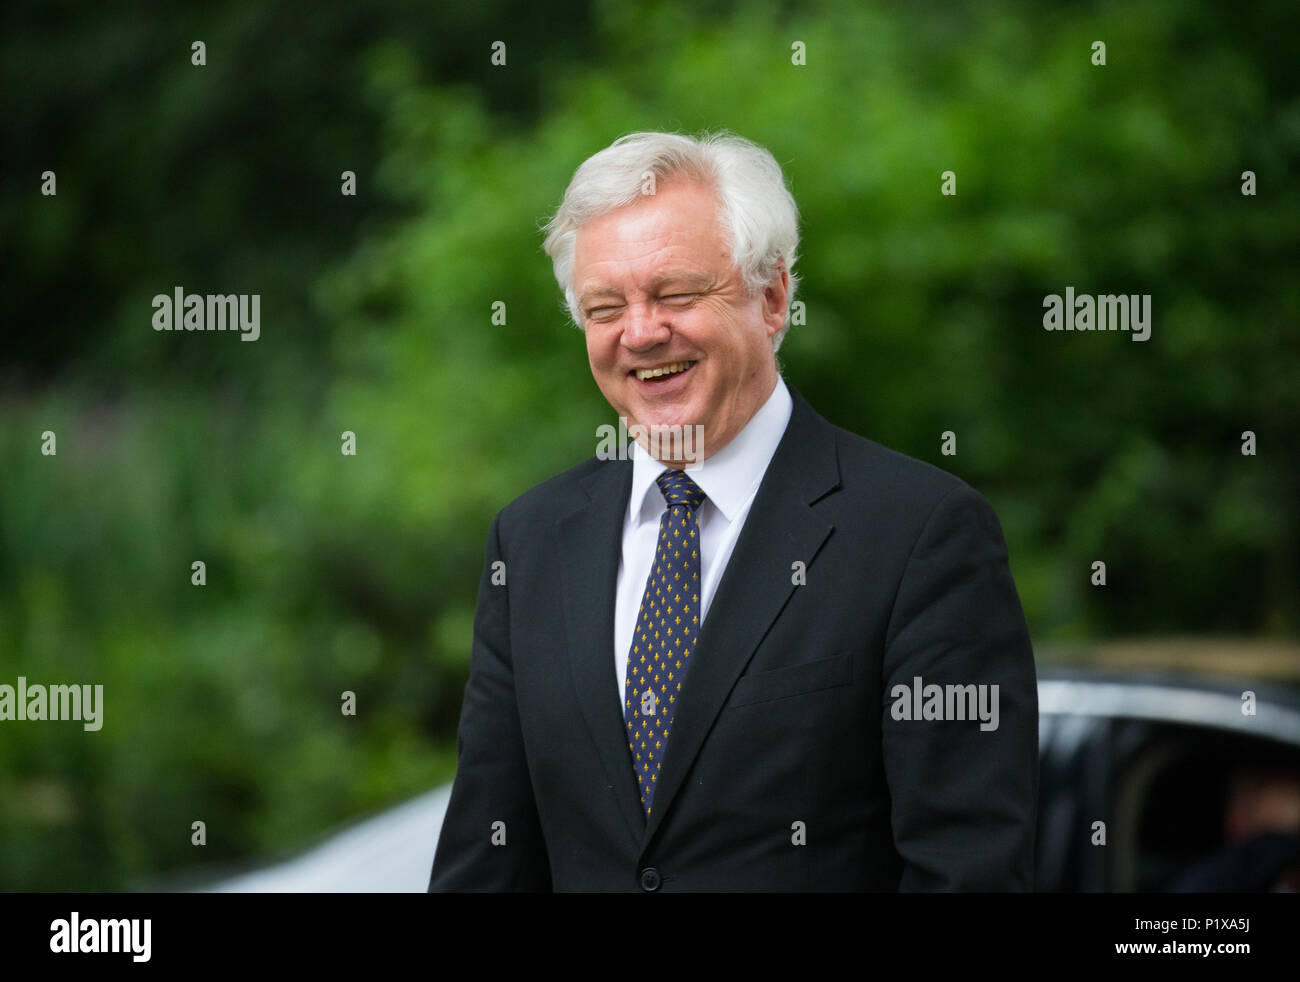 David Davis, Fomer Secretary for Exiting the European Union, at Downing street for a Cabinet meeting Stock Photo